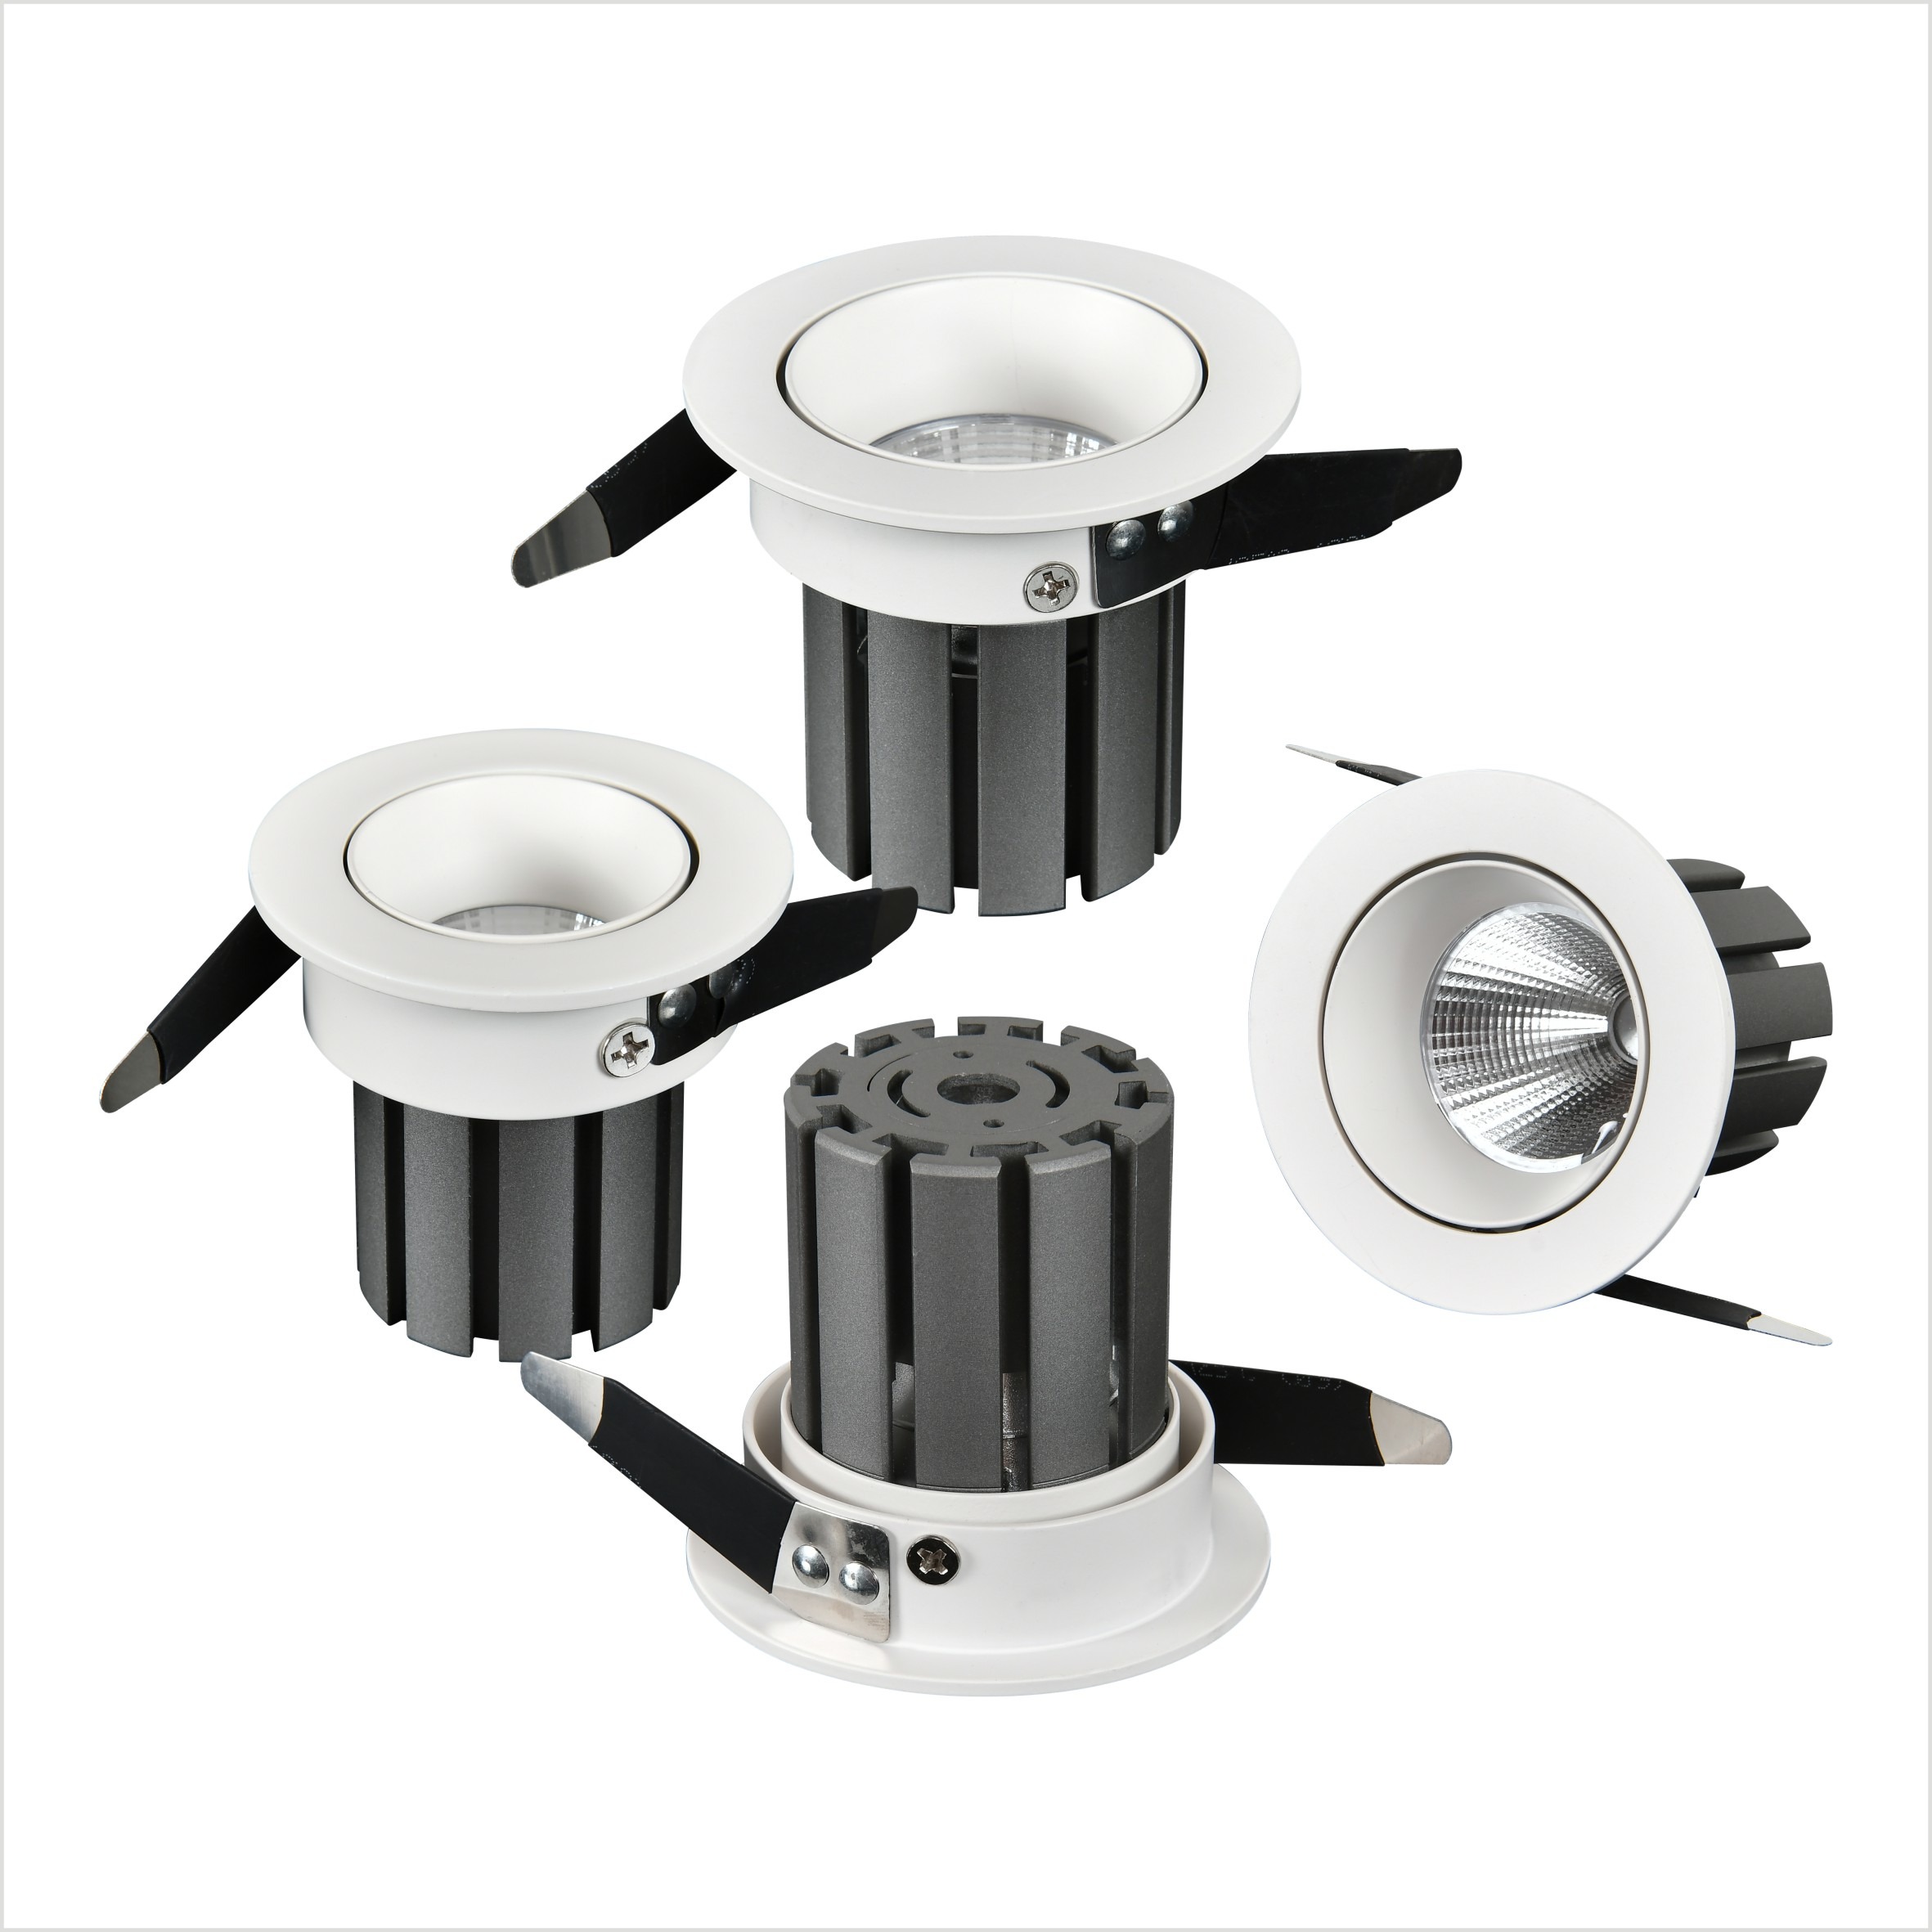 China Led Recessed Downlights Manufacturers and Suppliers - Led Recessed Downlights Factory - SWIN LED